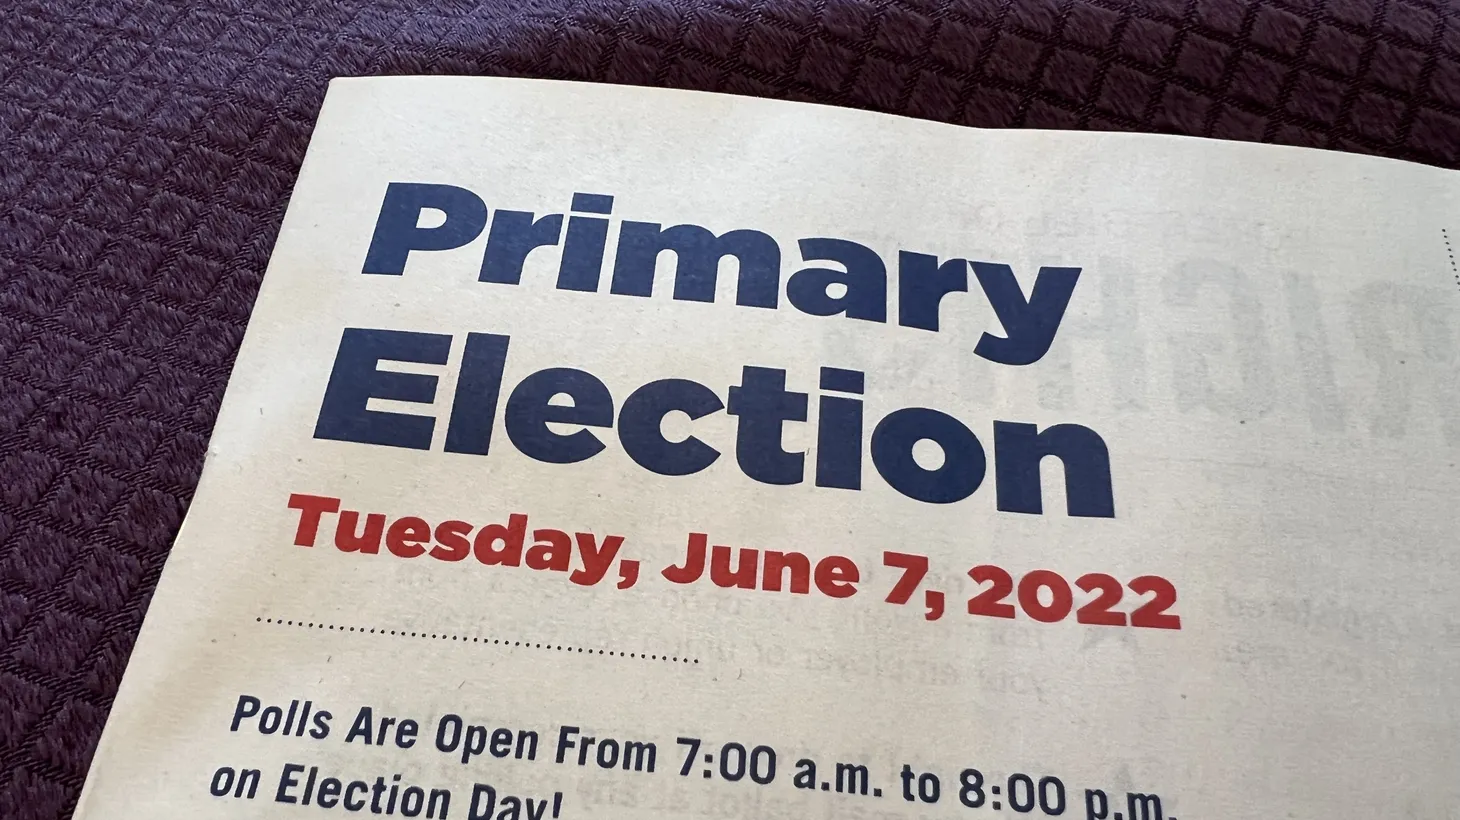 A voter information booklet for the 2022 American primary elections is displayed in Lafayette, California, May 6, 2022. “They might not realize that if one of the [LA mayoral] candidates gets to 50% on Tuesday, then there is no general election. You can win a mayoral contest by getting 50% plus one in the primary, and then it's over,” explains Paul Mitchell, vice president of Political Data Inc.